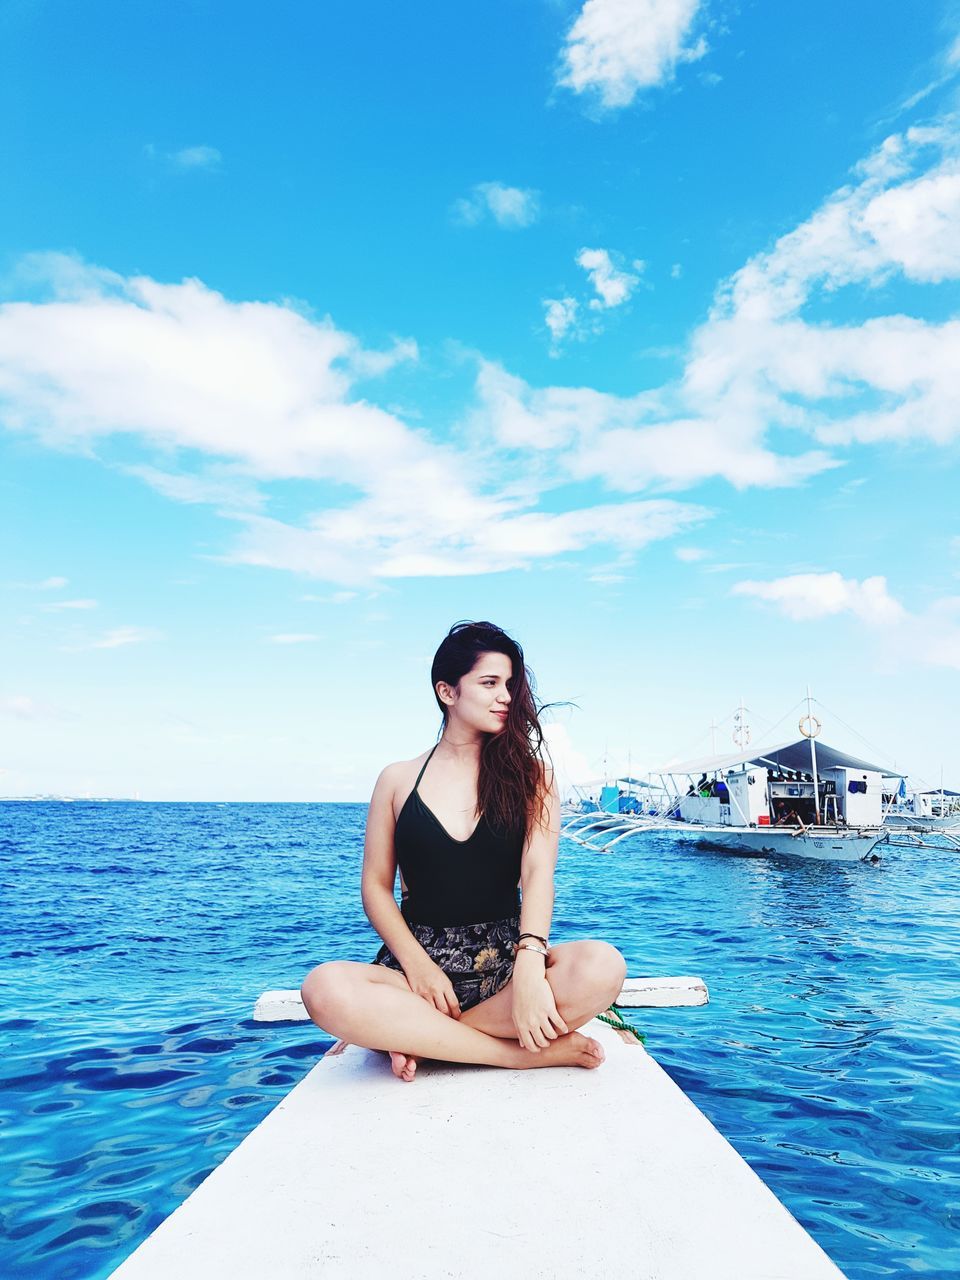 sky, water, sea, one person, sitting, cloud - sky, young adult, leisure activity, real people, outdoors, nature, young women, front view, lifestyles, day, beautiful woman, relaxation, beauty in nature, scenics, nautical vessel, vacations, horizon over water, adult, people